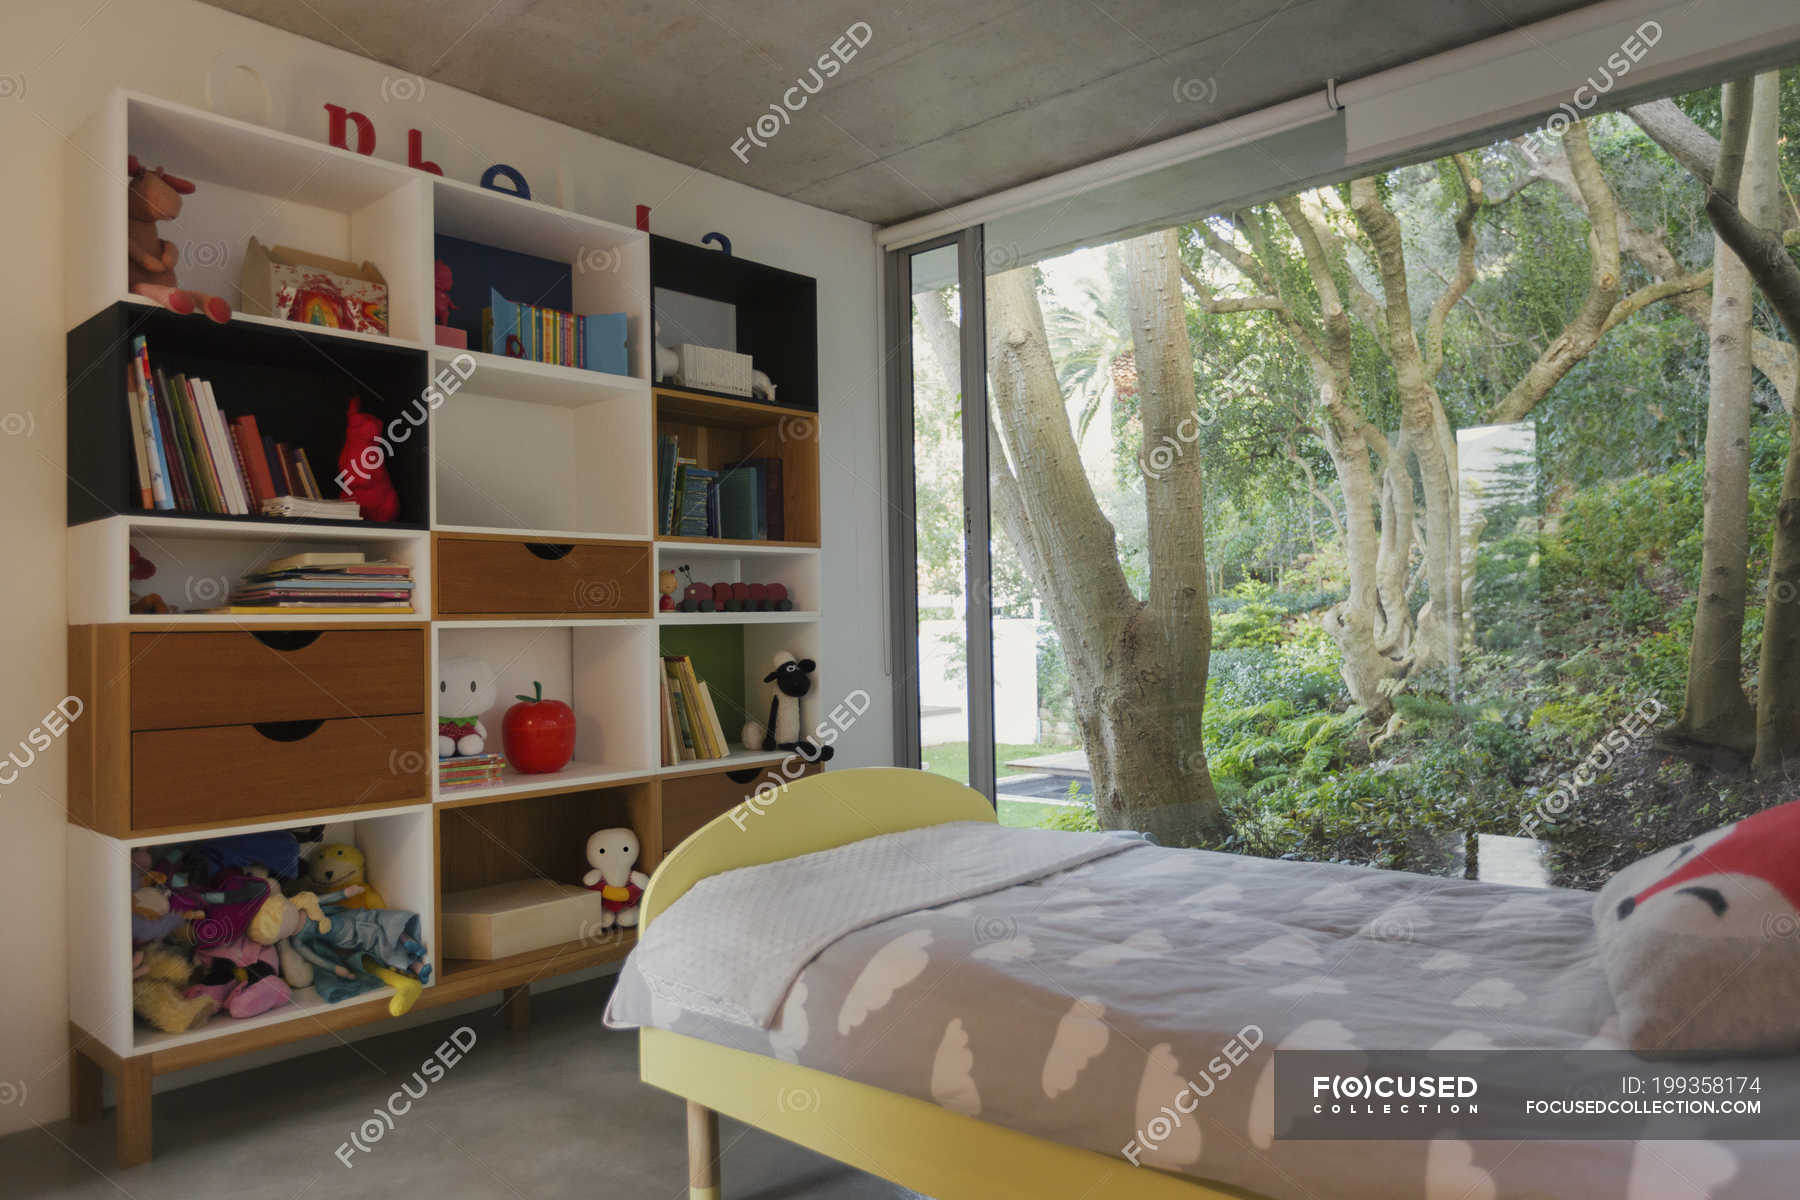 Home Showcase Interior Childs Bedroom With View Of Trees In